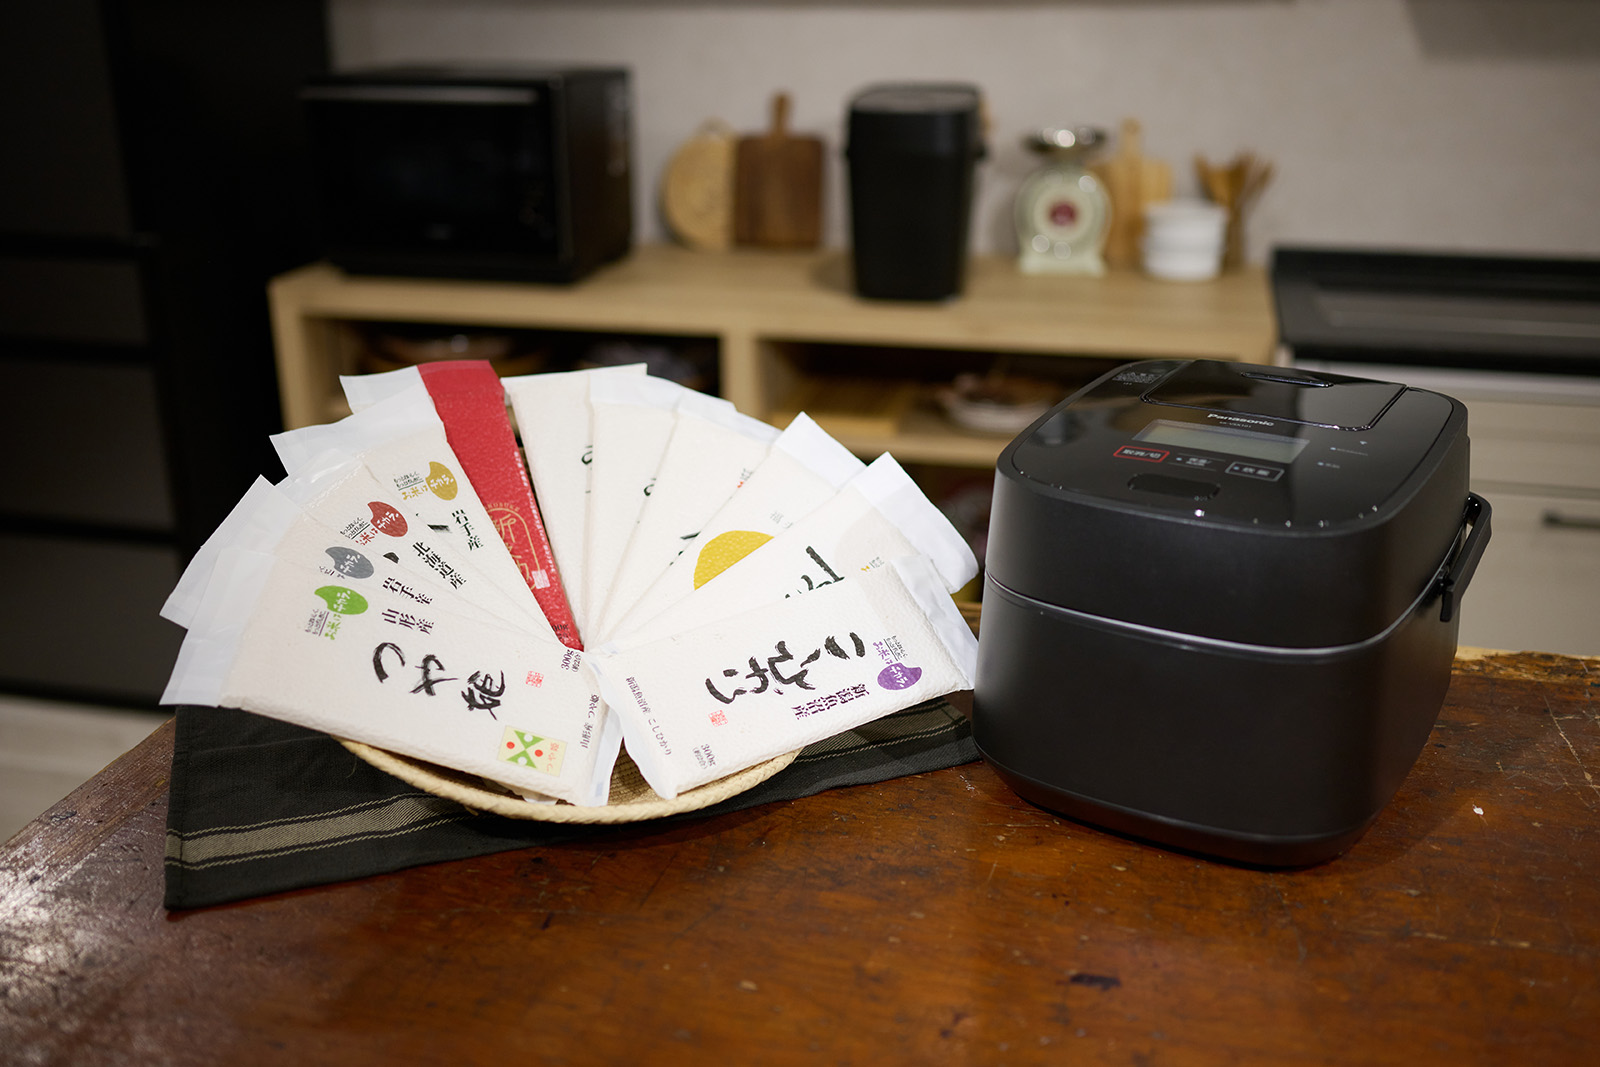 Photo: The monthly subscription plan includes a variety of branded rice in single-serving packs and a rice cooker.